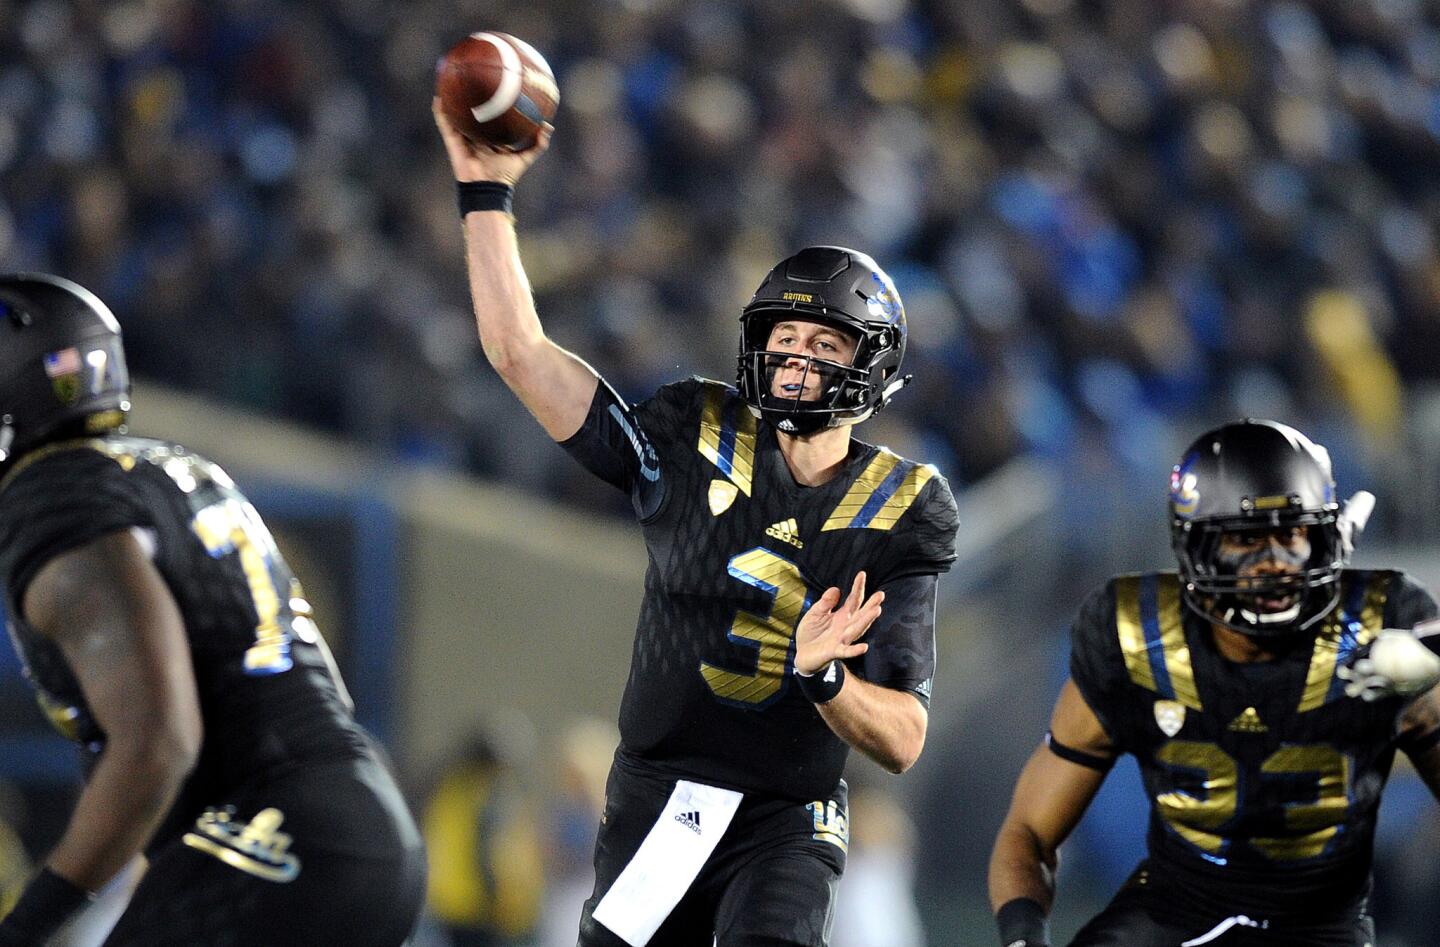 UCLA's young but poised Josh Rosen looms as a peril to USC